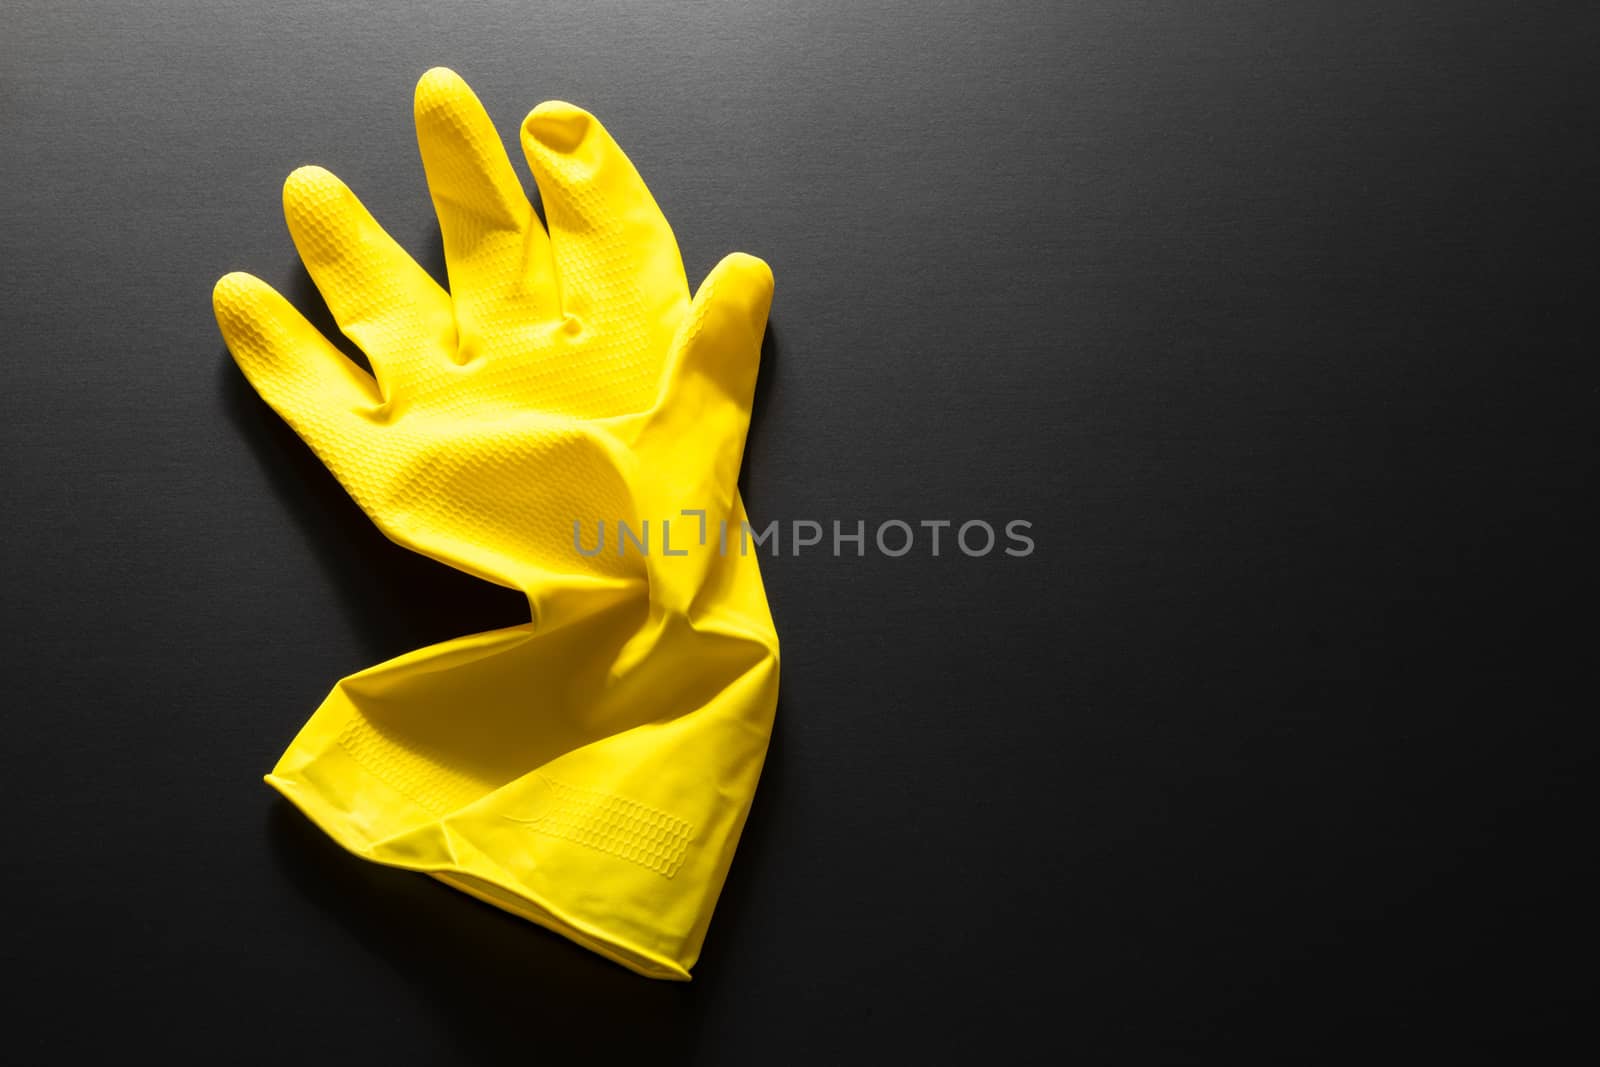 An image of a yellow rubber glove isolated on black background